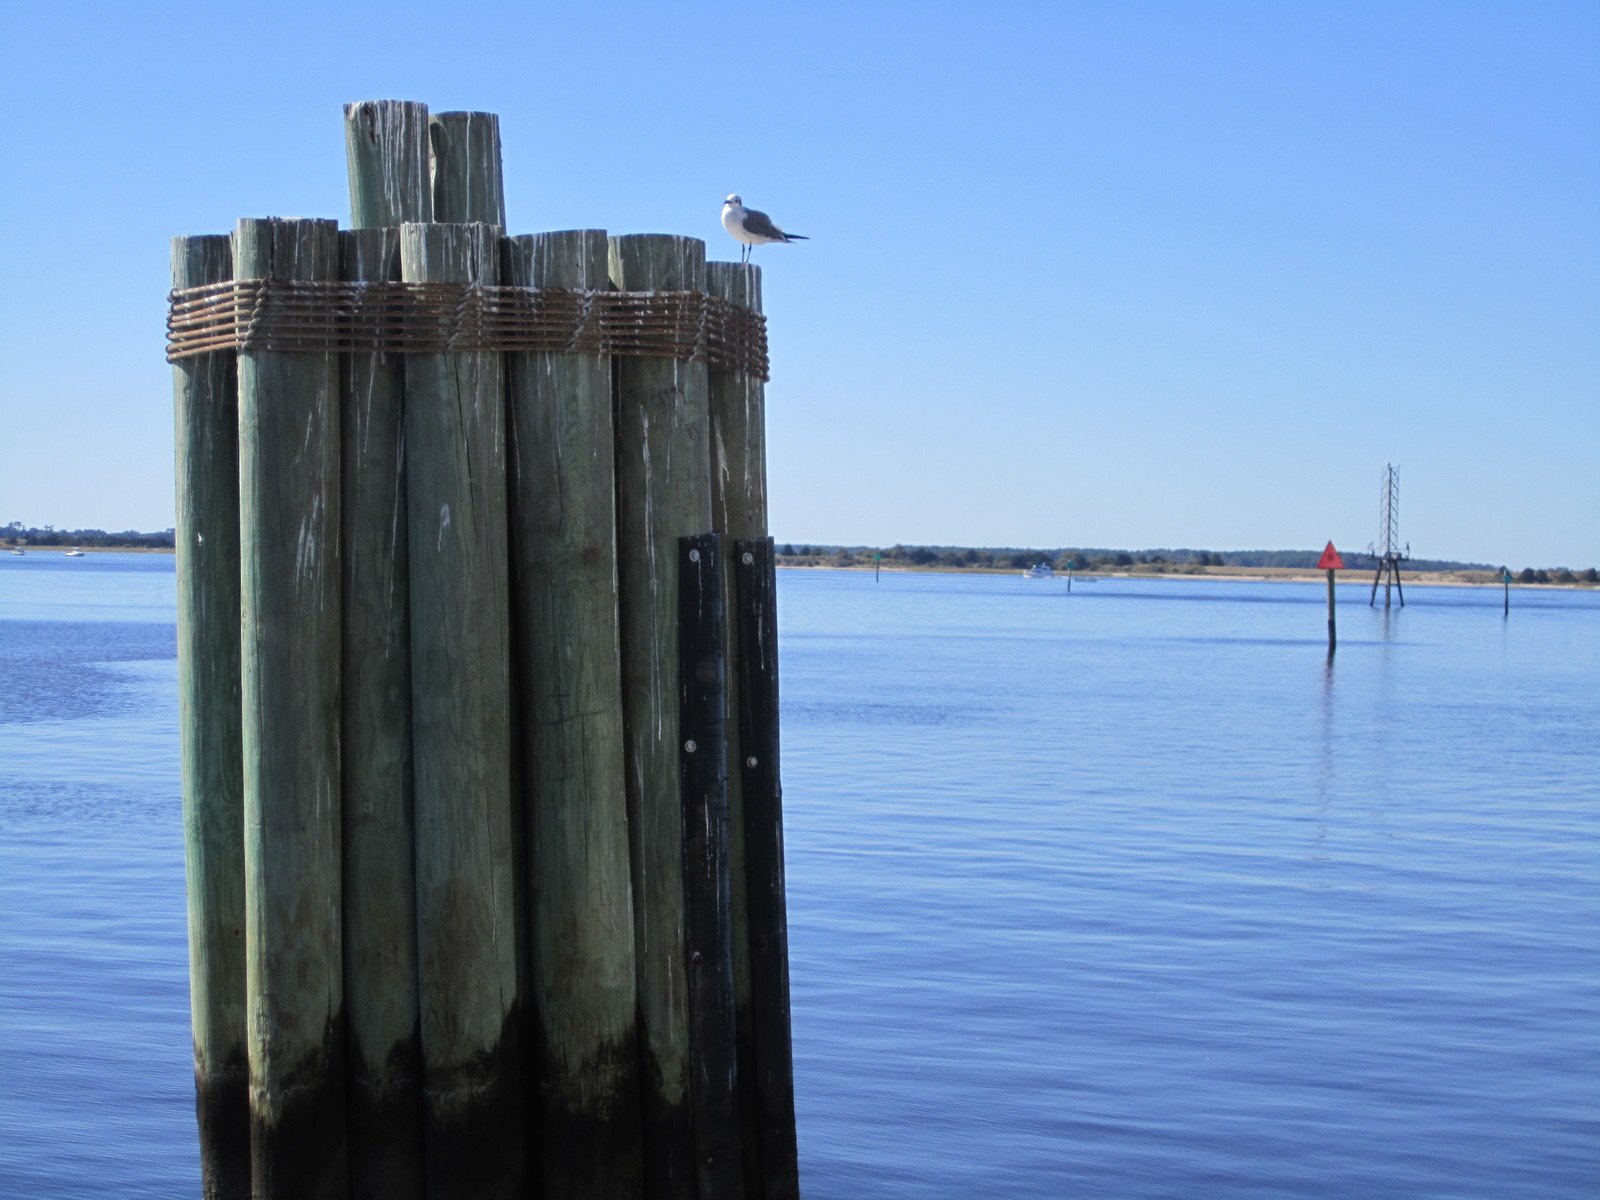 a pier near a body of water with a small bird sitting on top